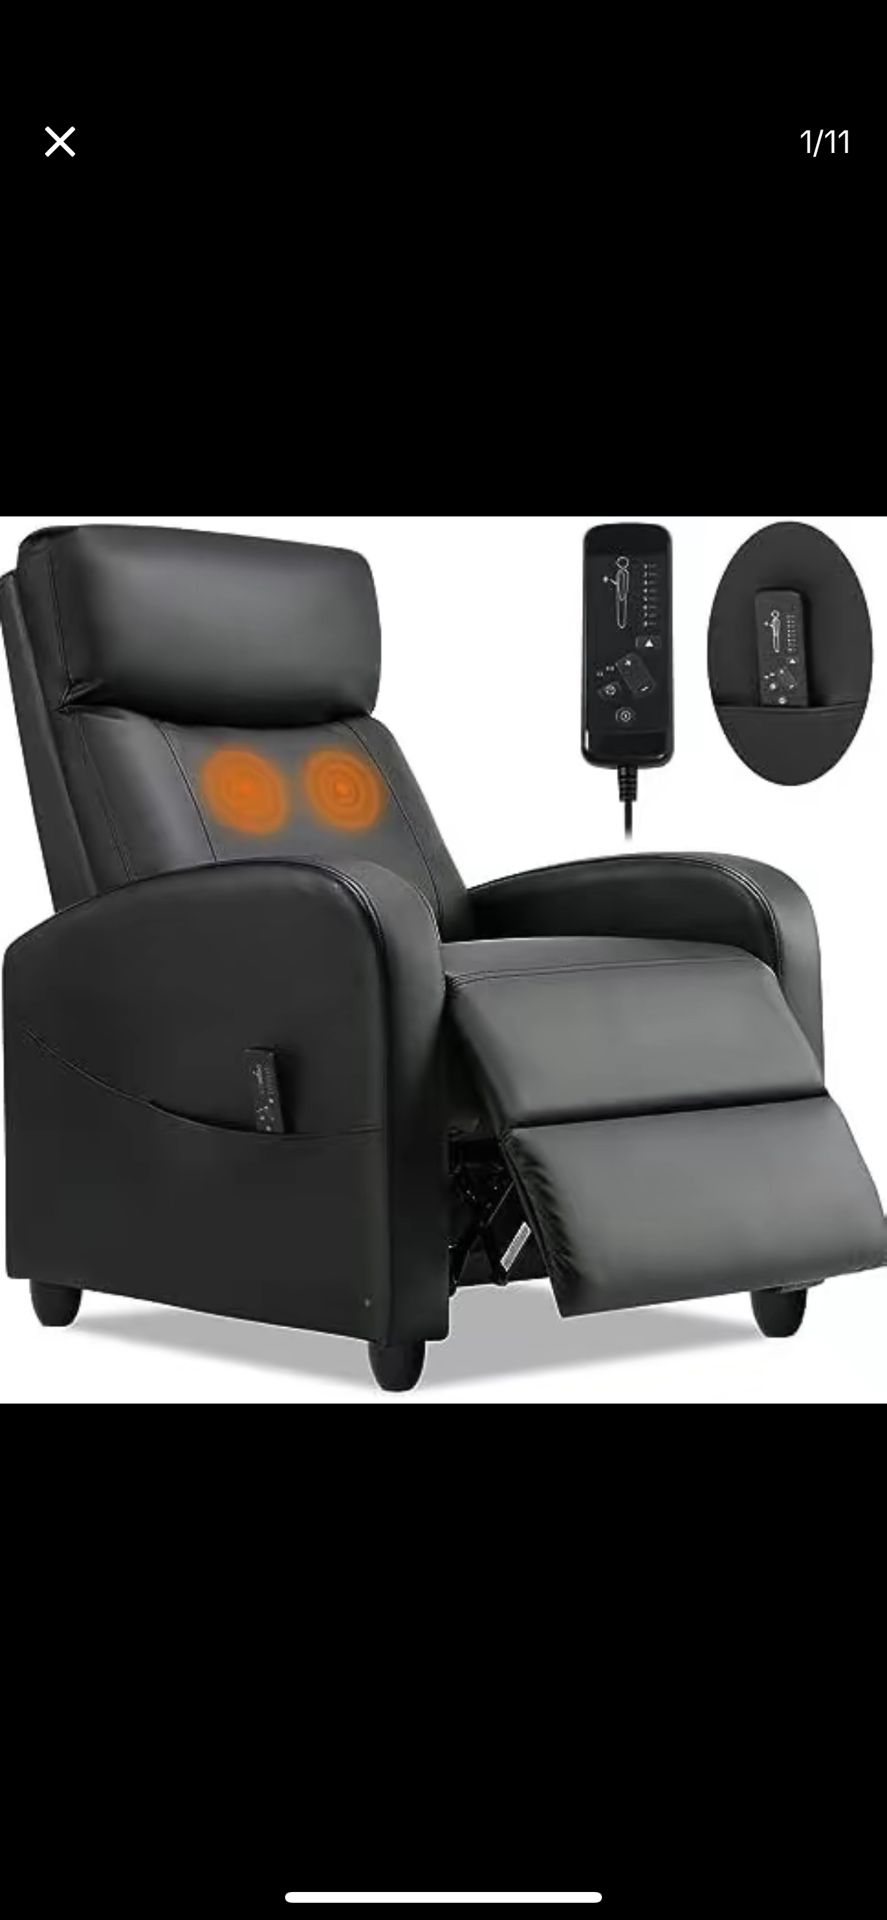 Recliner Massage Chair New In Box